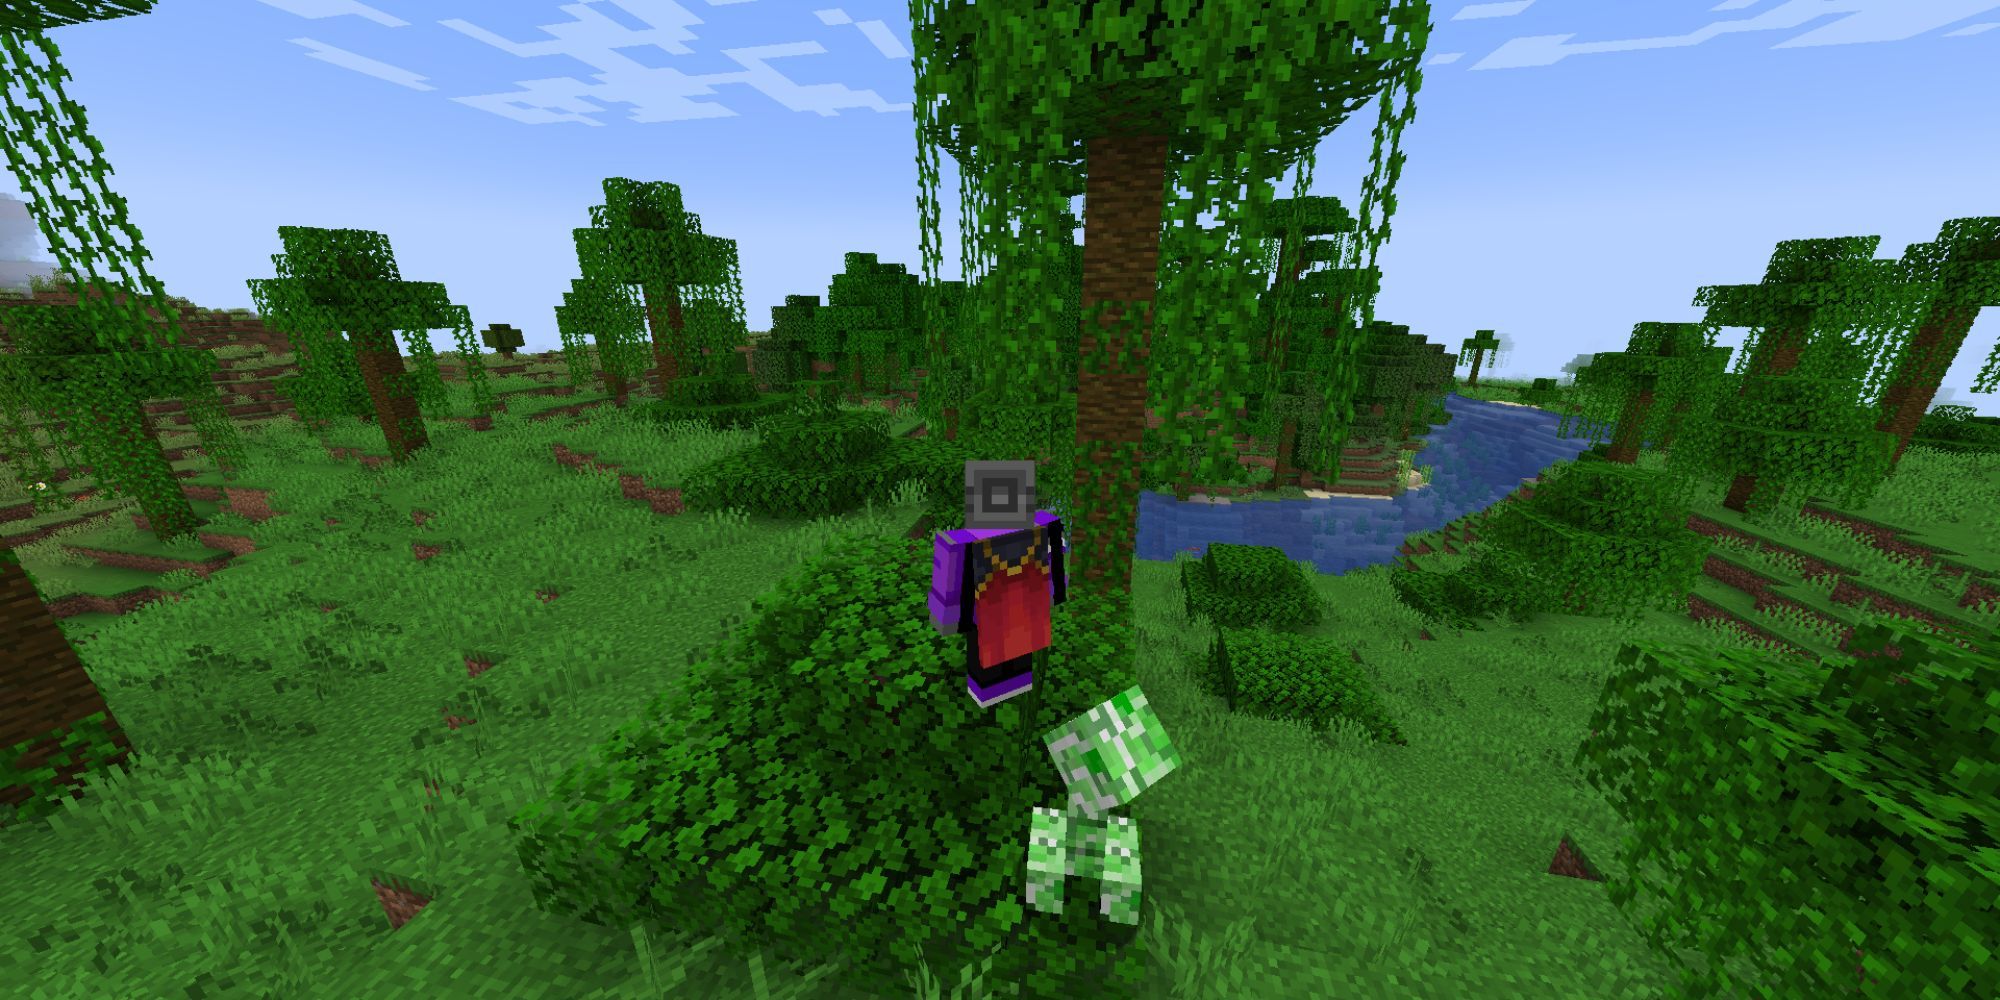 A creeper patiently stalks a player from the back, remaining close nearby, waiting to explode when they turn around.